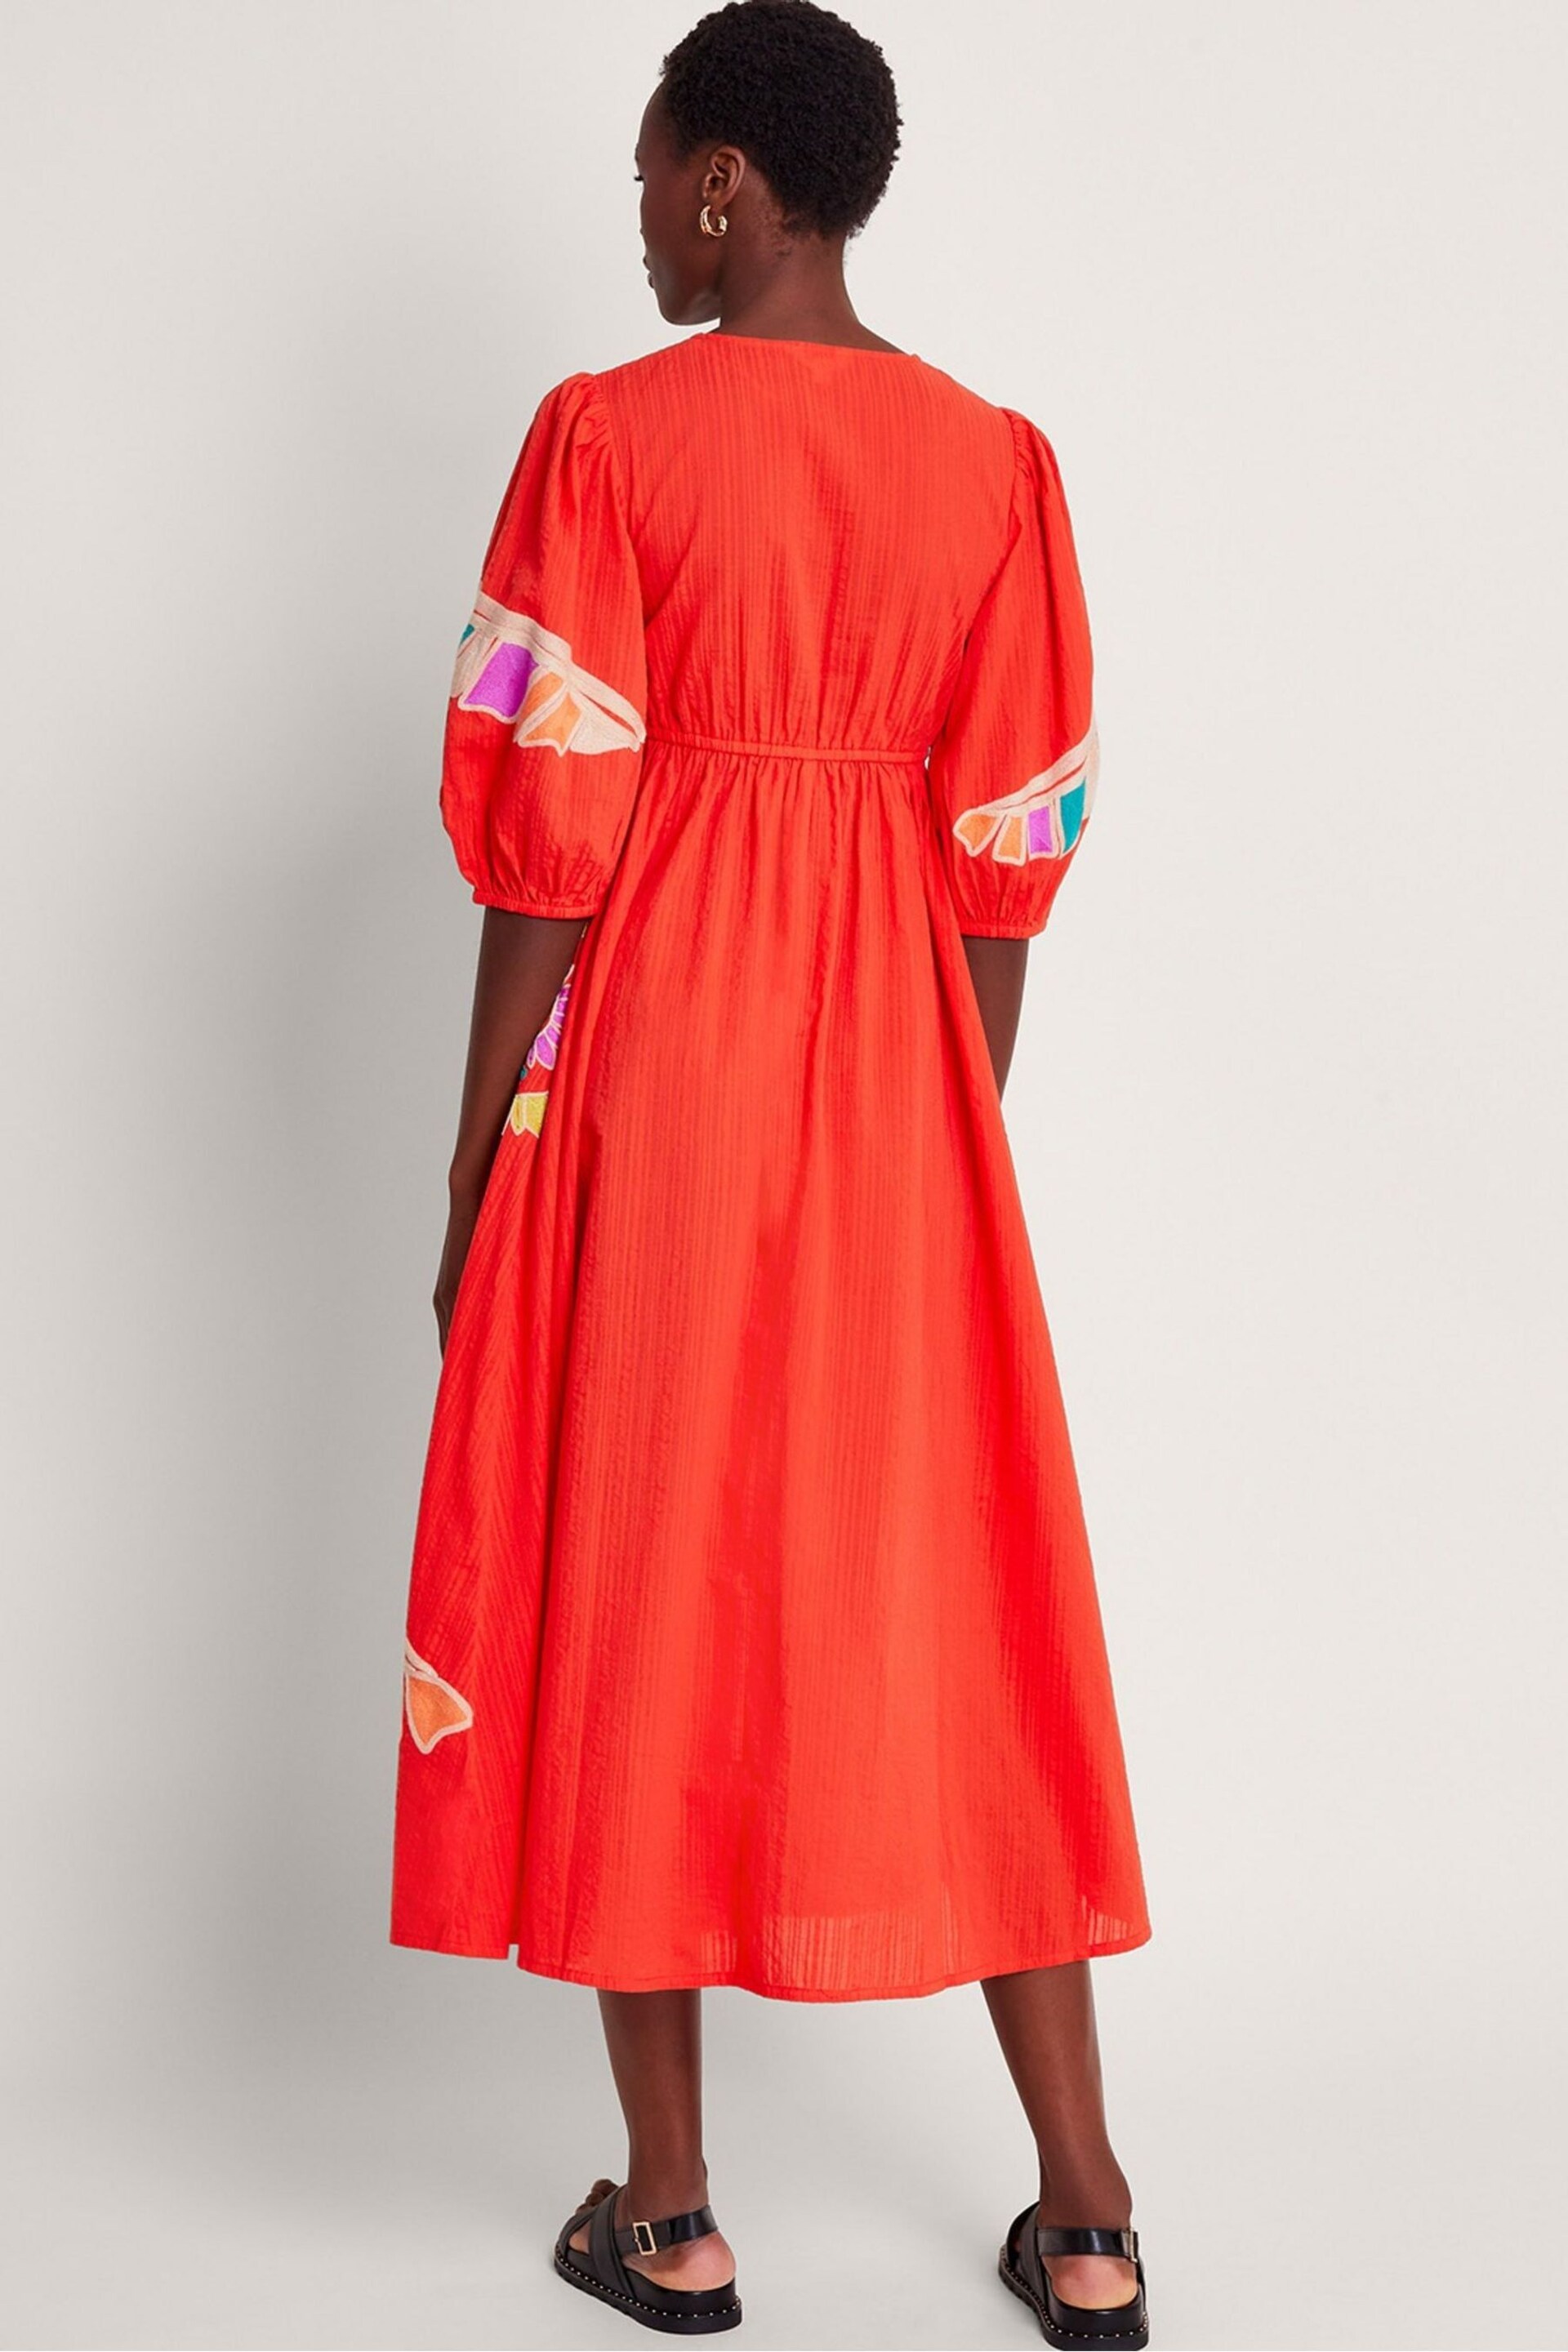 Monsoon Red Ceres Embroidered Dress - Image 2 of 5